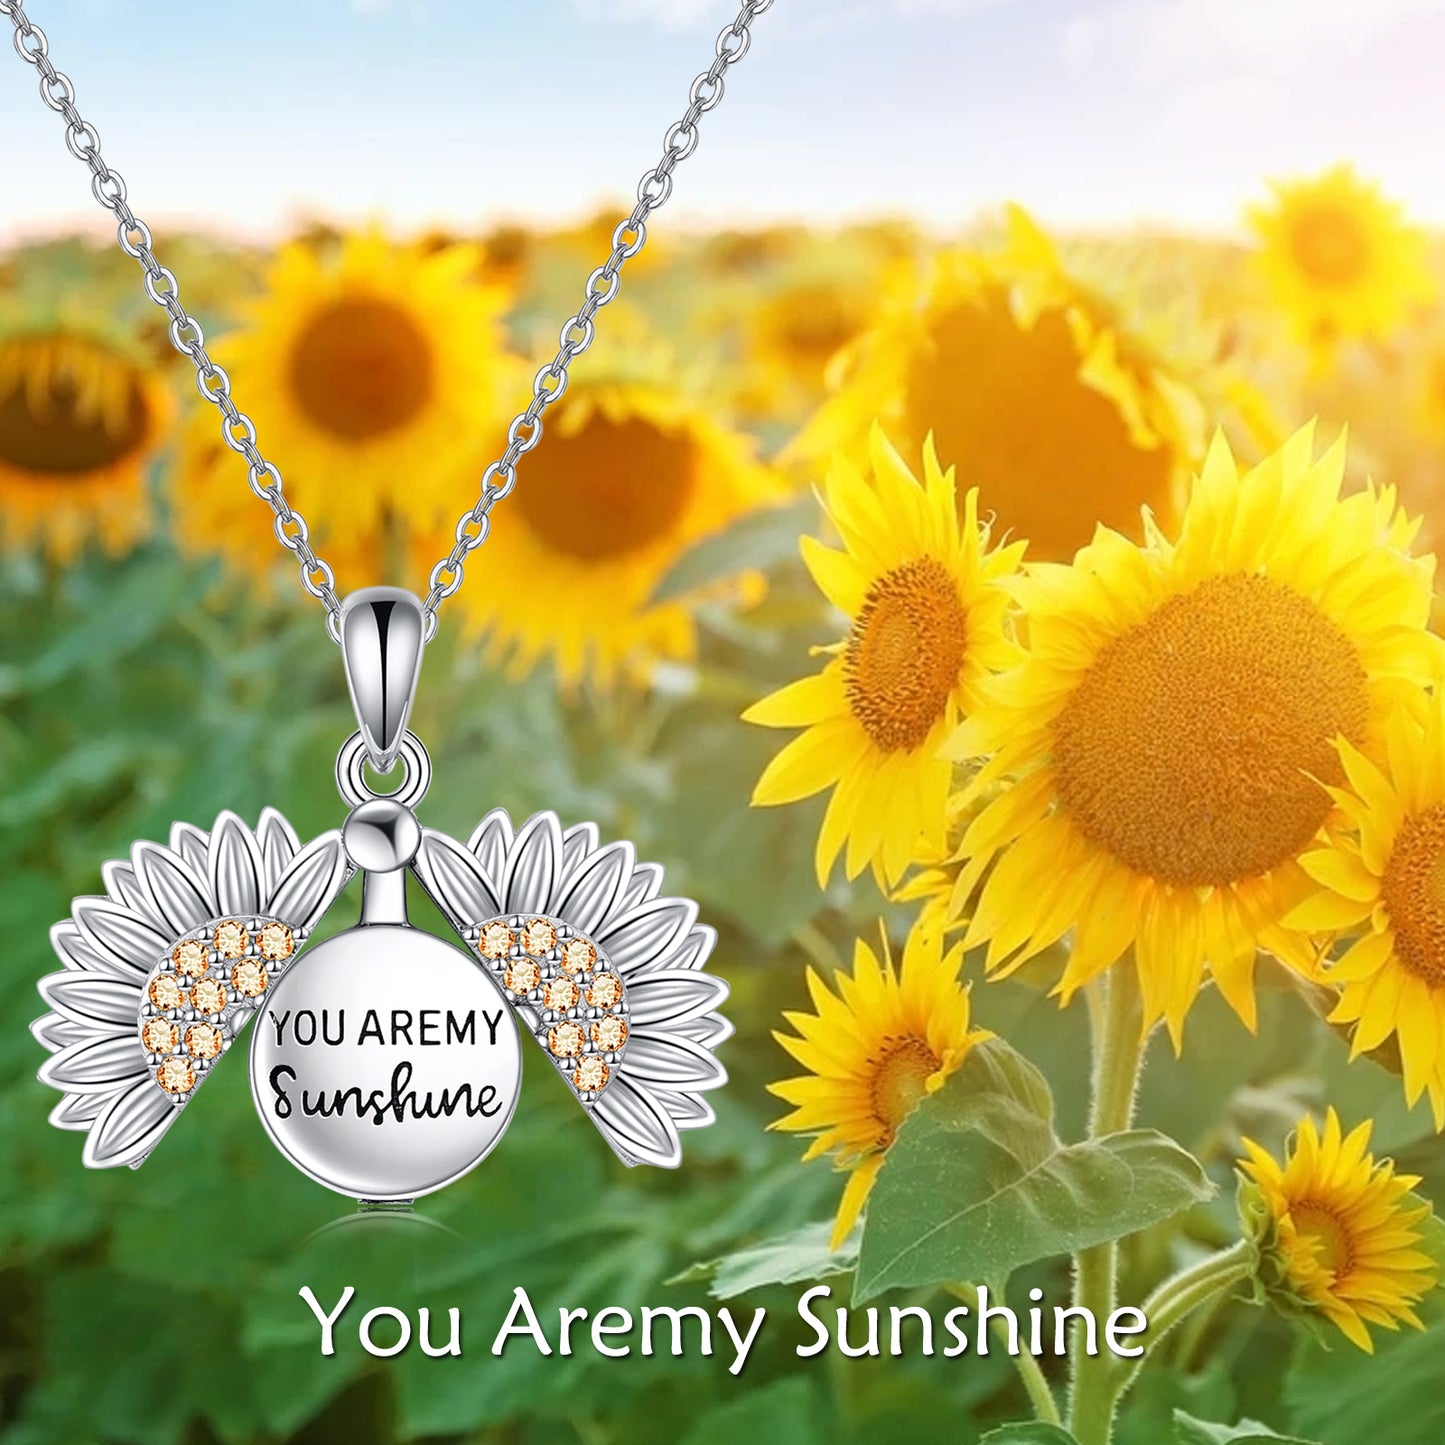 "You are My Sunshine" Sunflower Necklace